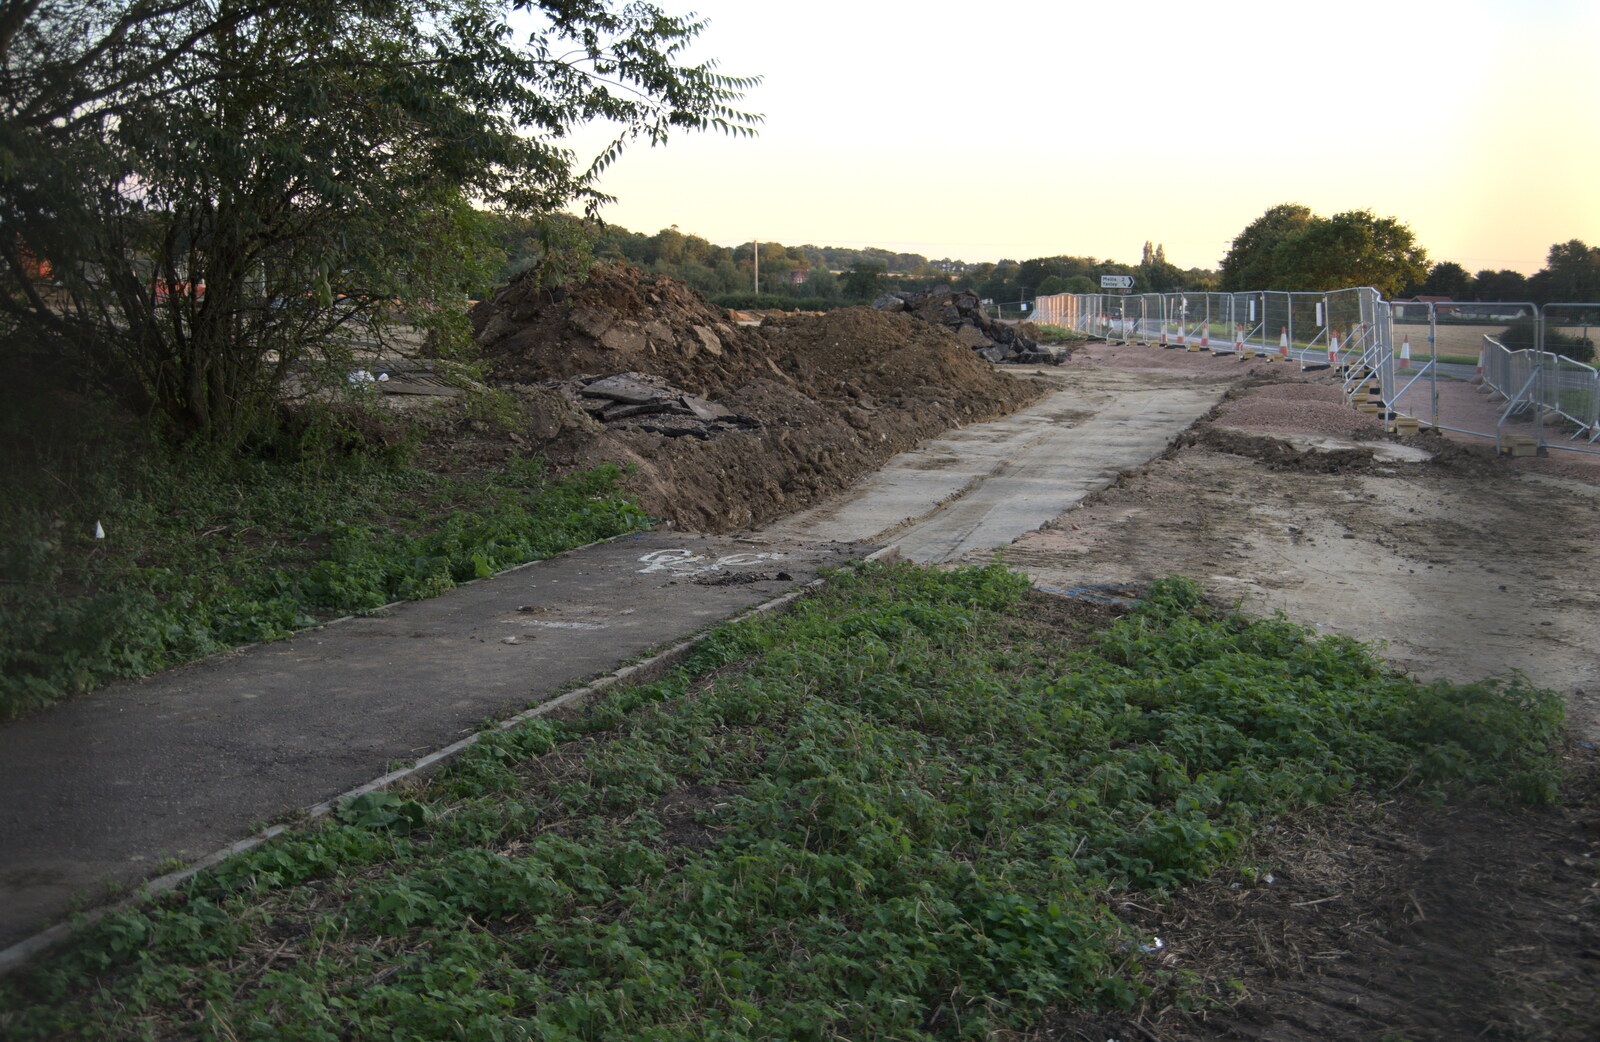 The cycle path is dug up from Cycling Eye Airfield and Station 119, Eye, Suffolk - 9th September 2020